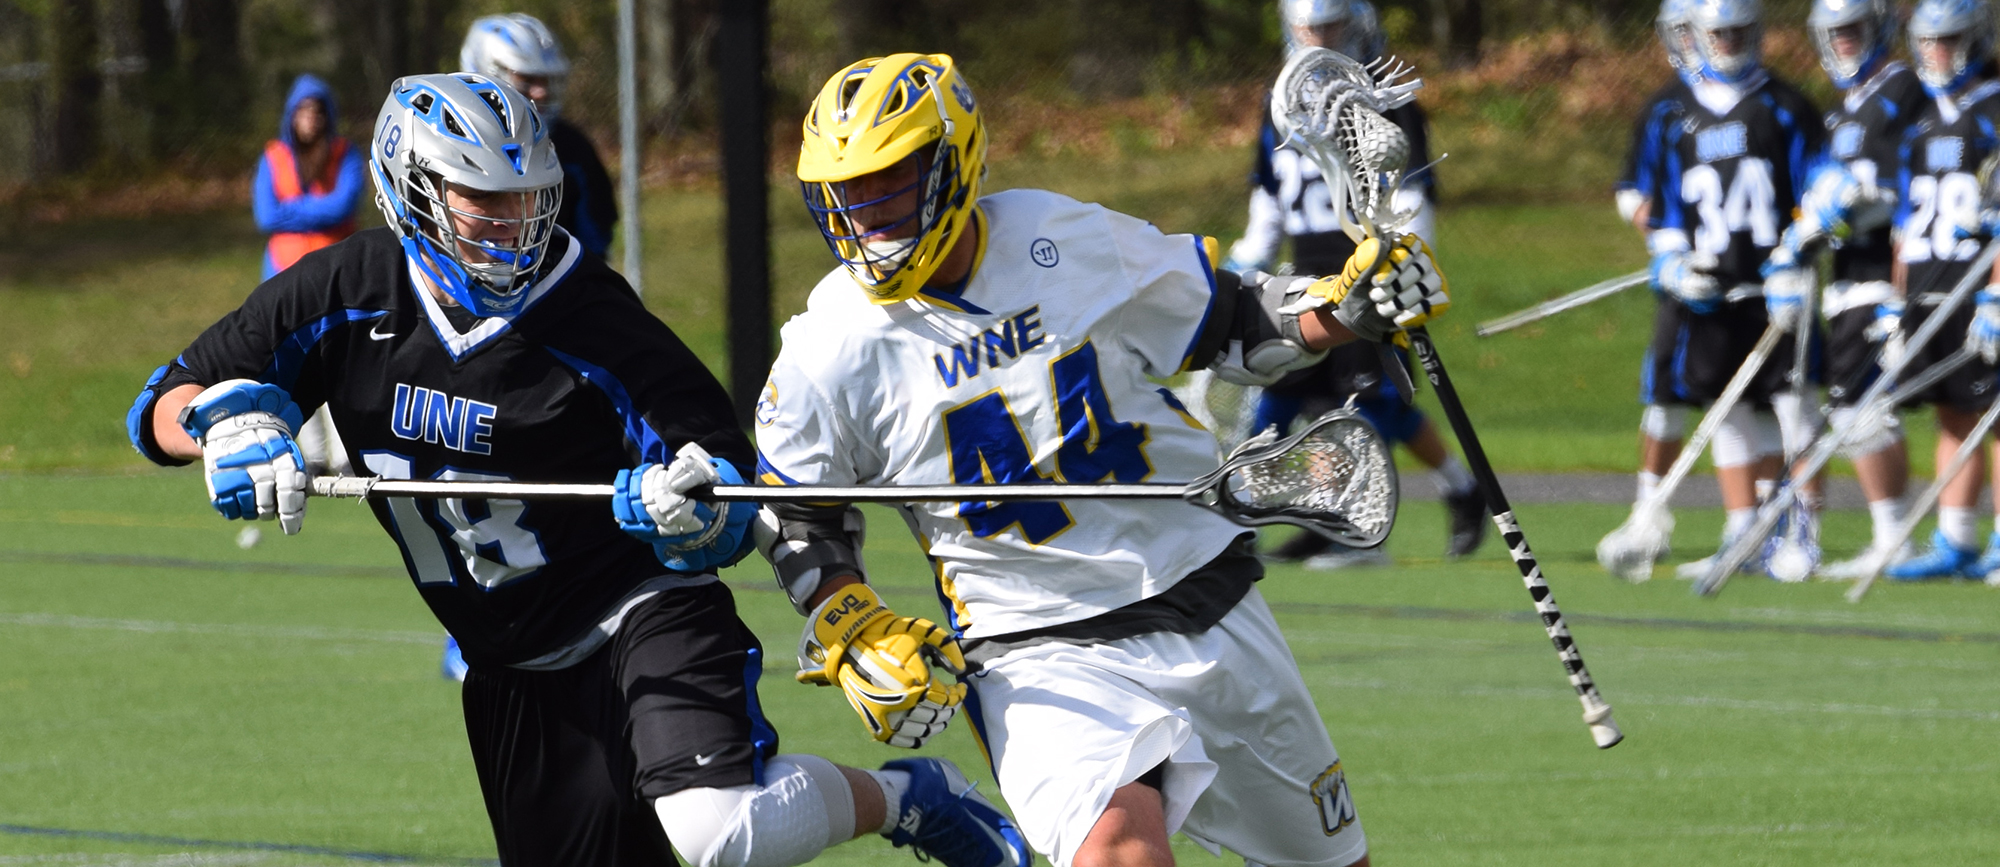 Senior Frank Medlicott recorded two points as Western New England defeated UNE, 11-7, in the CCC semifinals on Wednesday. (Photo by Rachael Margossian)